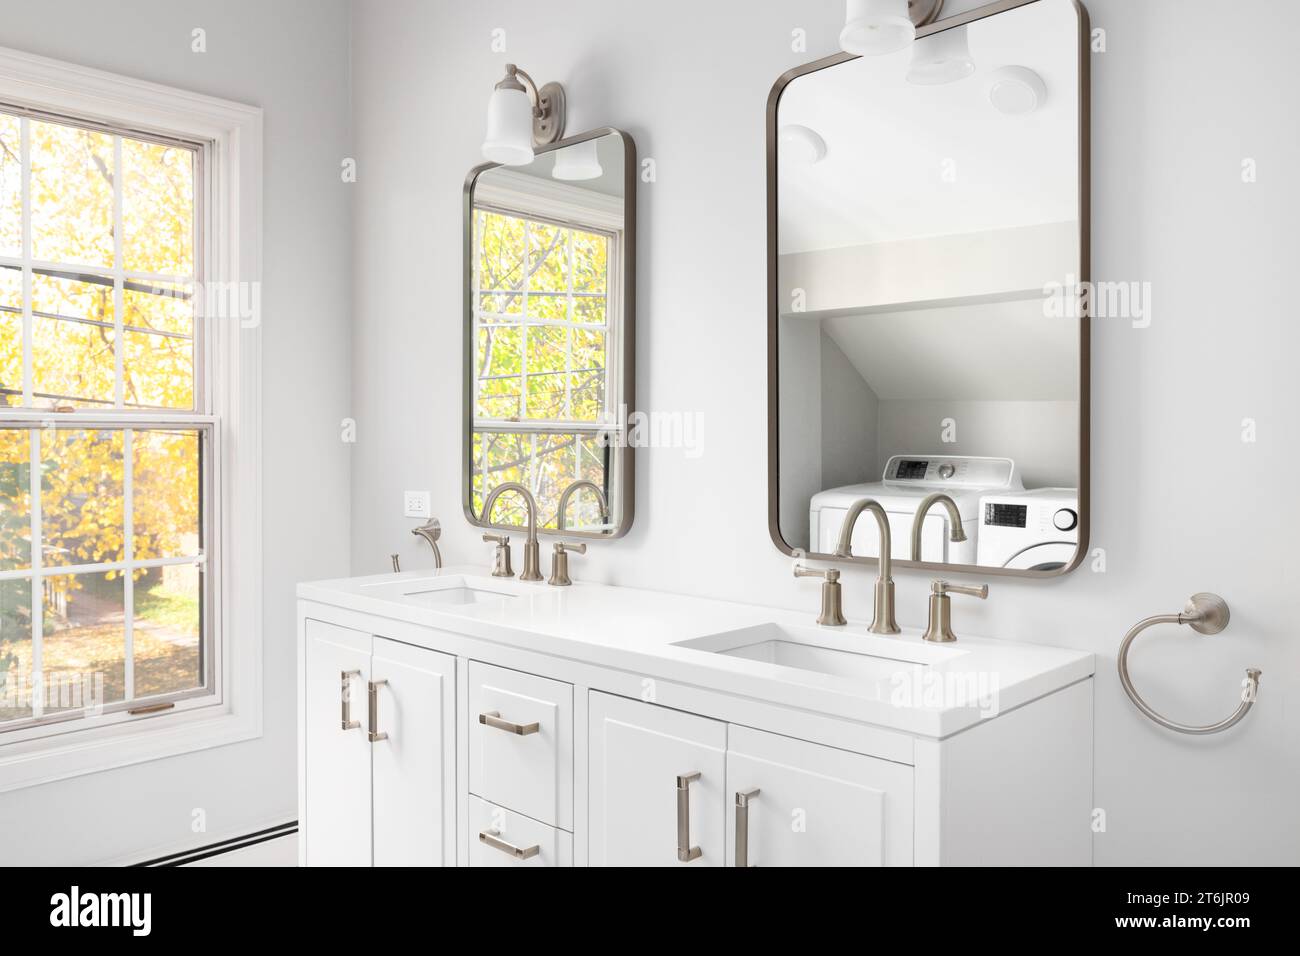 A bathroom detail with a white cabinet, bronze faucets and mirrors, a view of the washer dryer in the reflection, and fall colors outside. Stock Photo